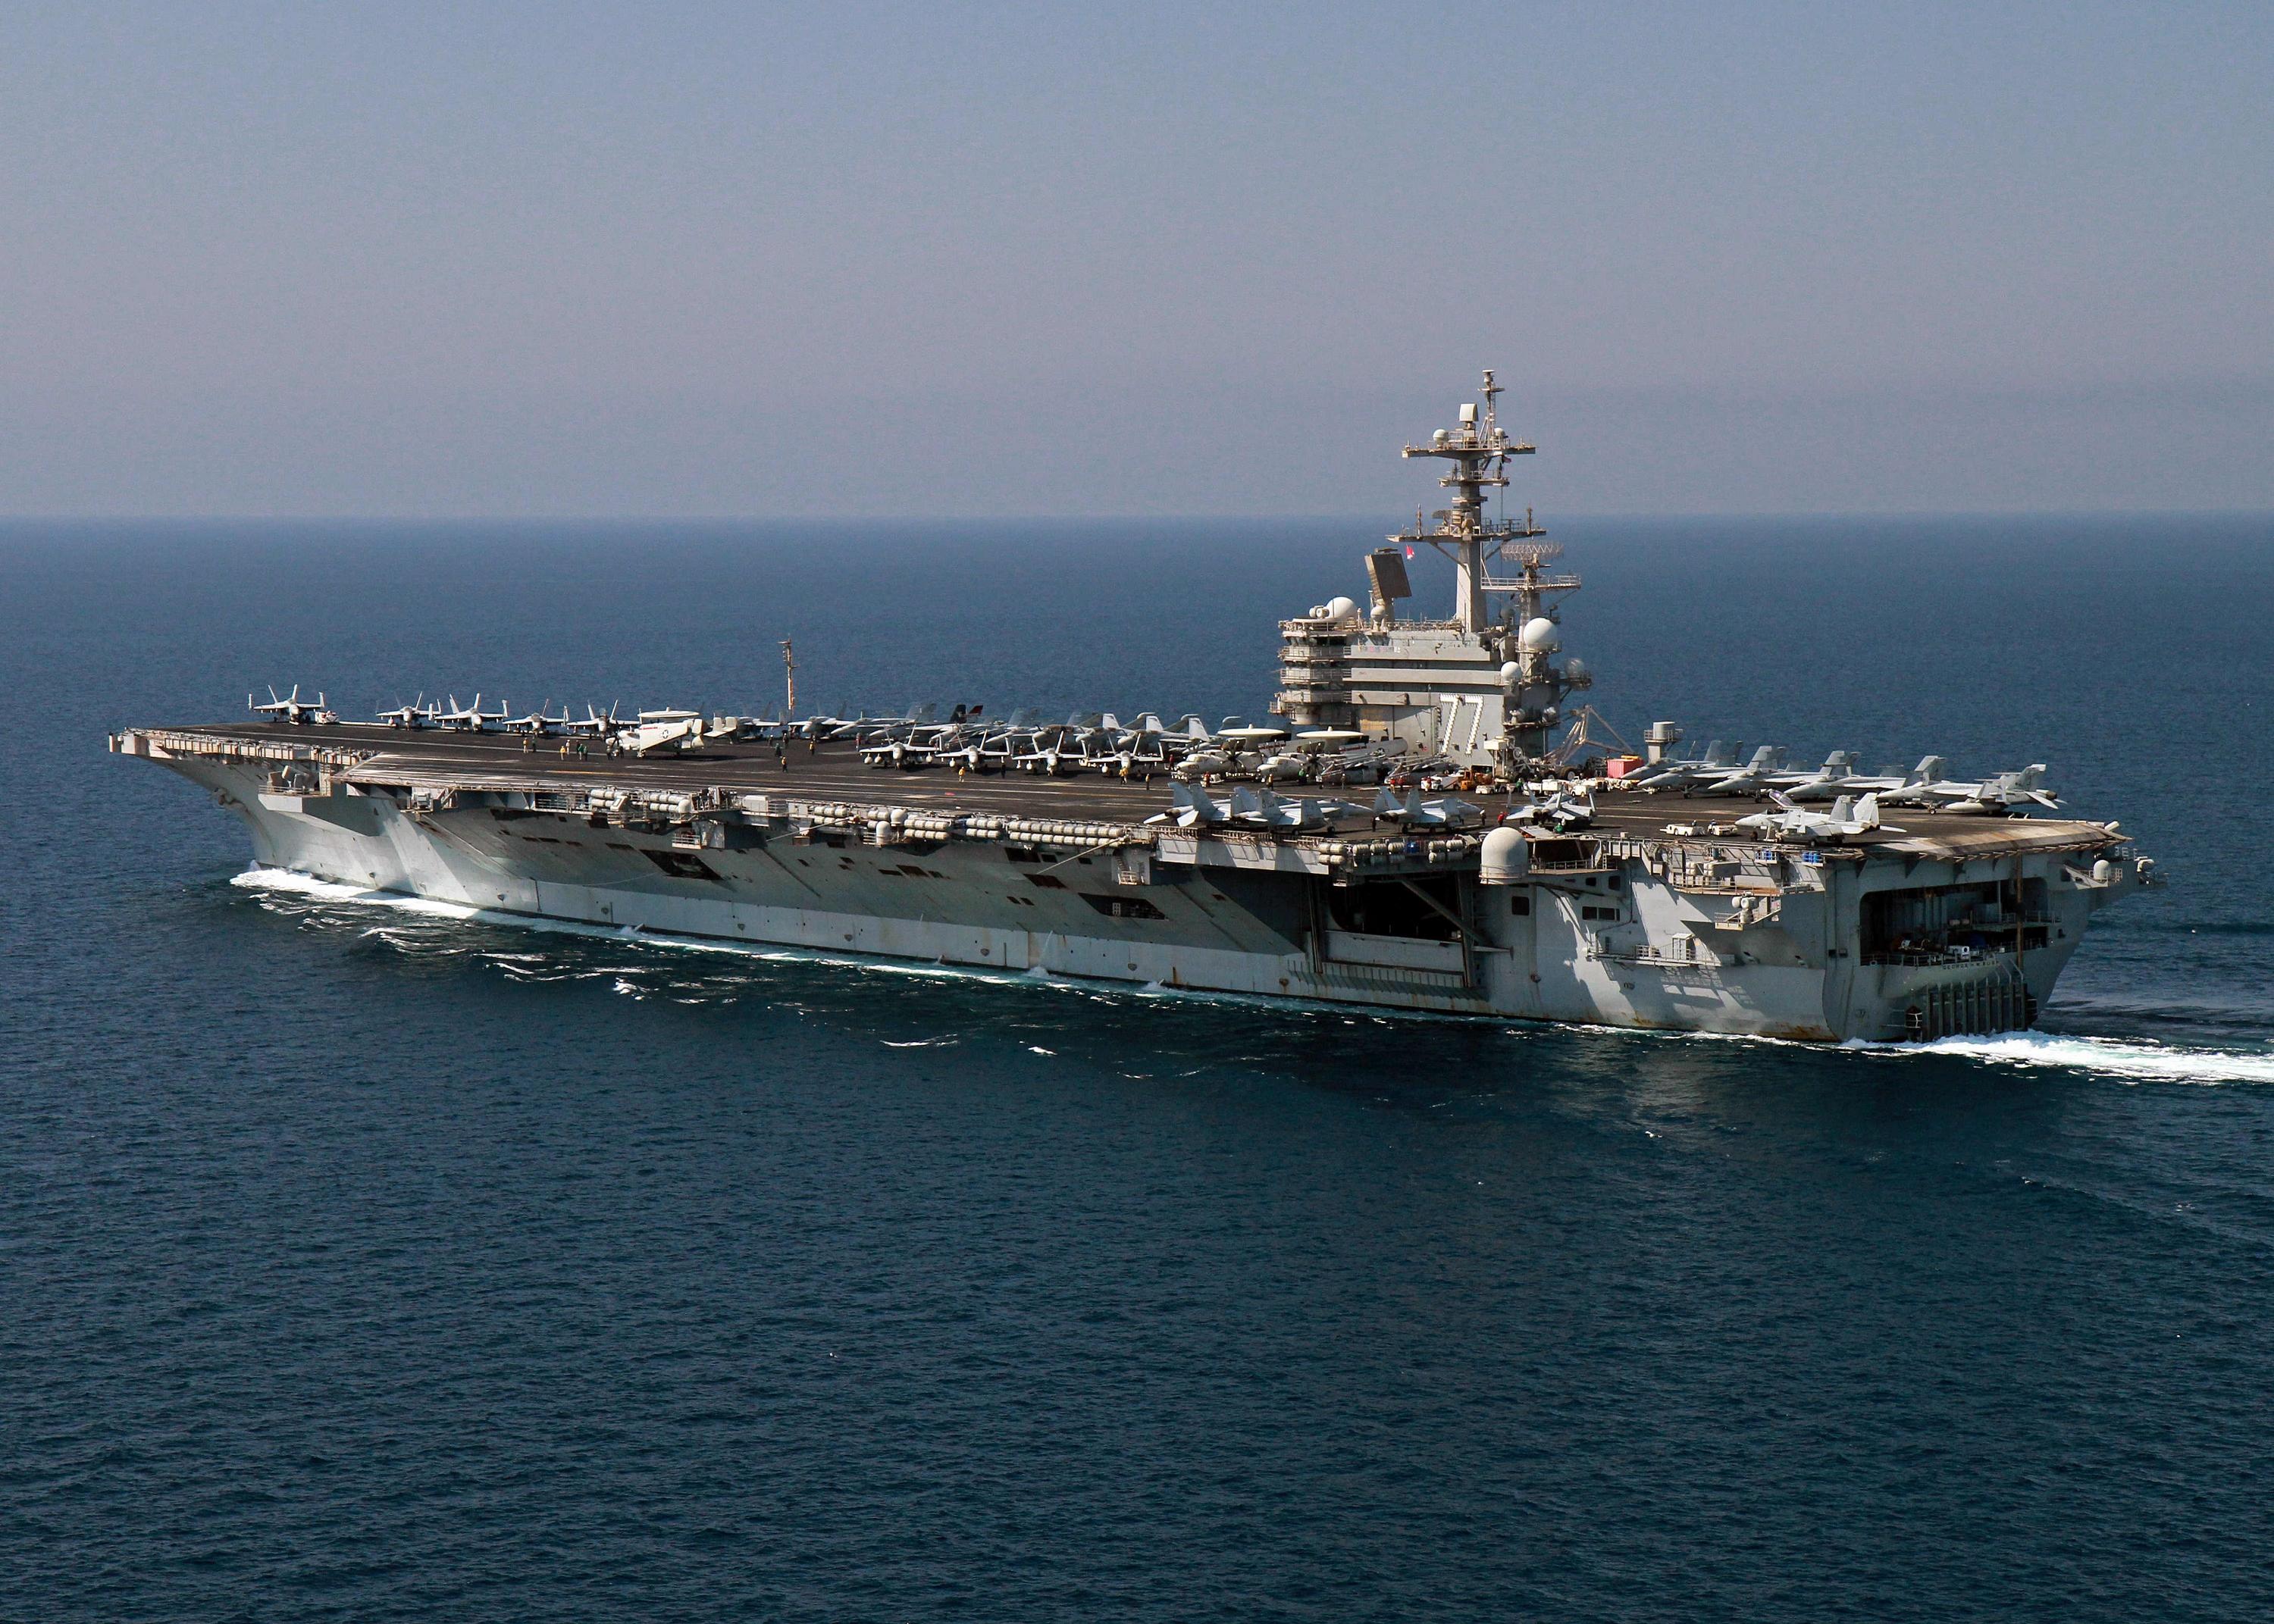 Uss Nimitz Supercarrier Of United States Navy Wallpaper Was Last